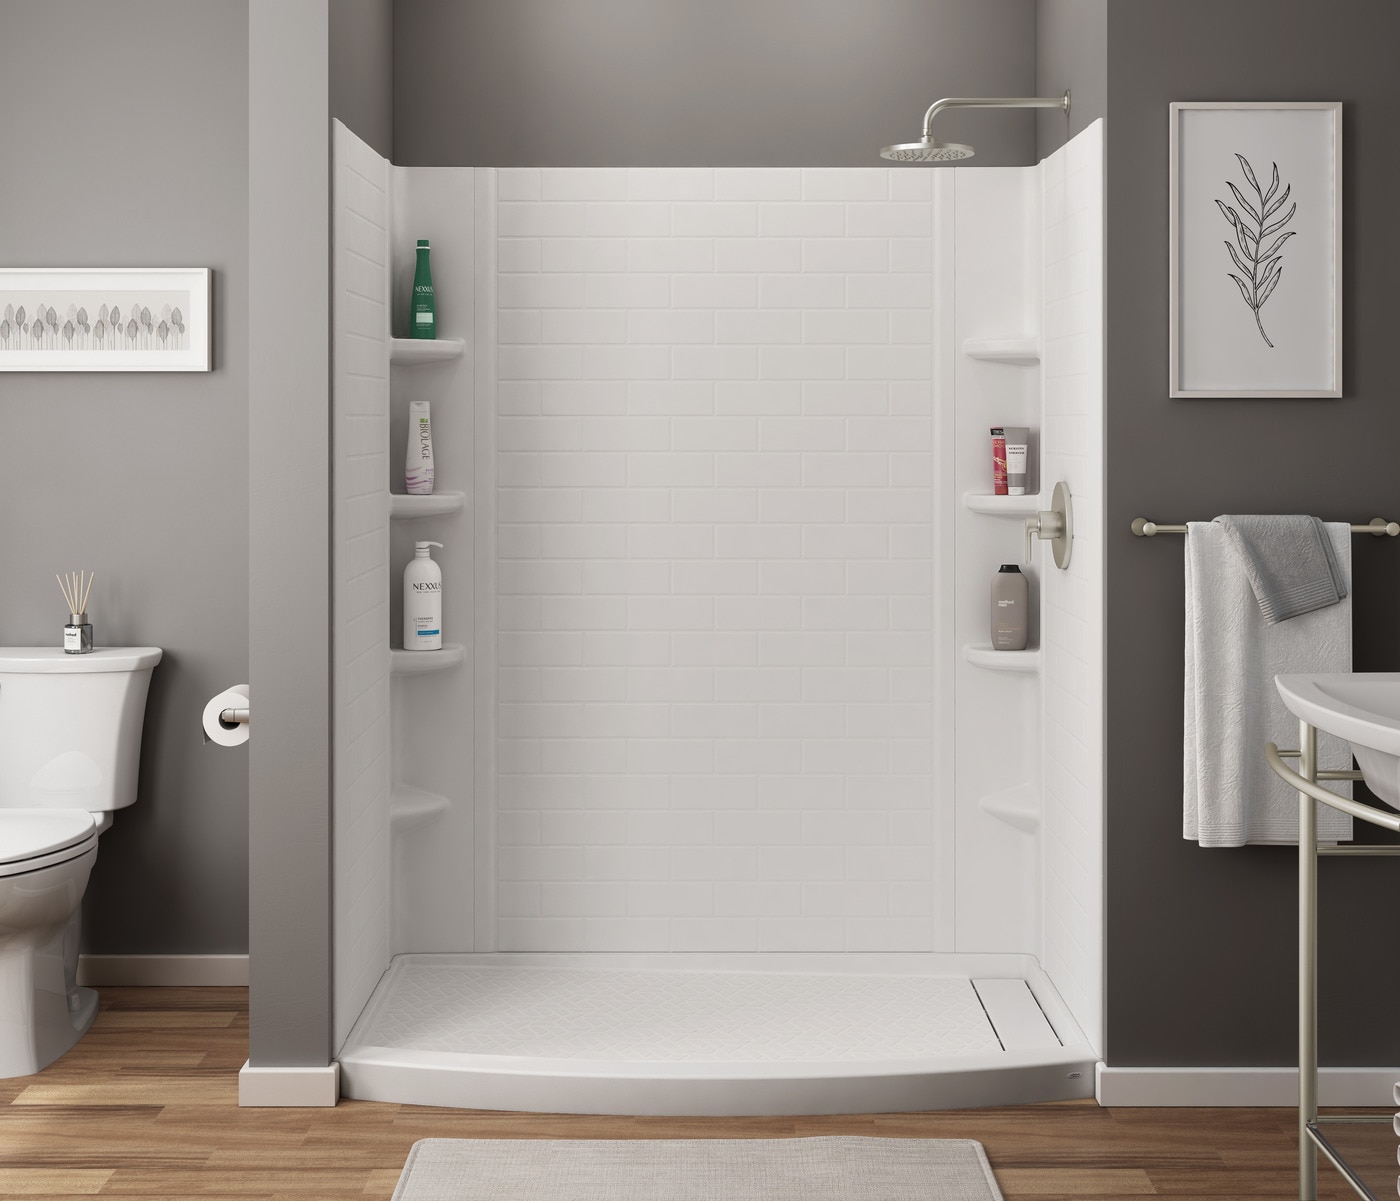 Passage 60 in. x 72 in. 2-Piece Glue-Up Alcove Shower Wall with Corner  Shelf in White Subway Tile